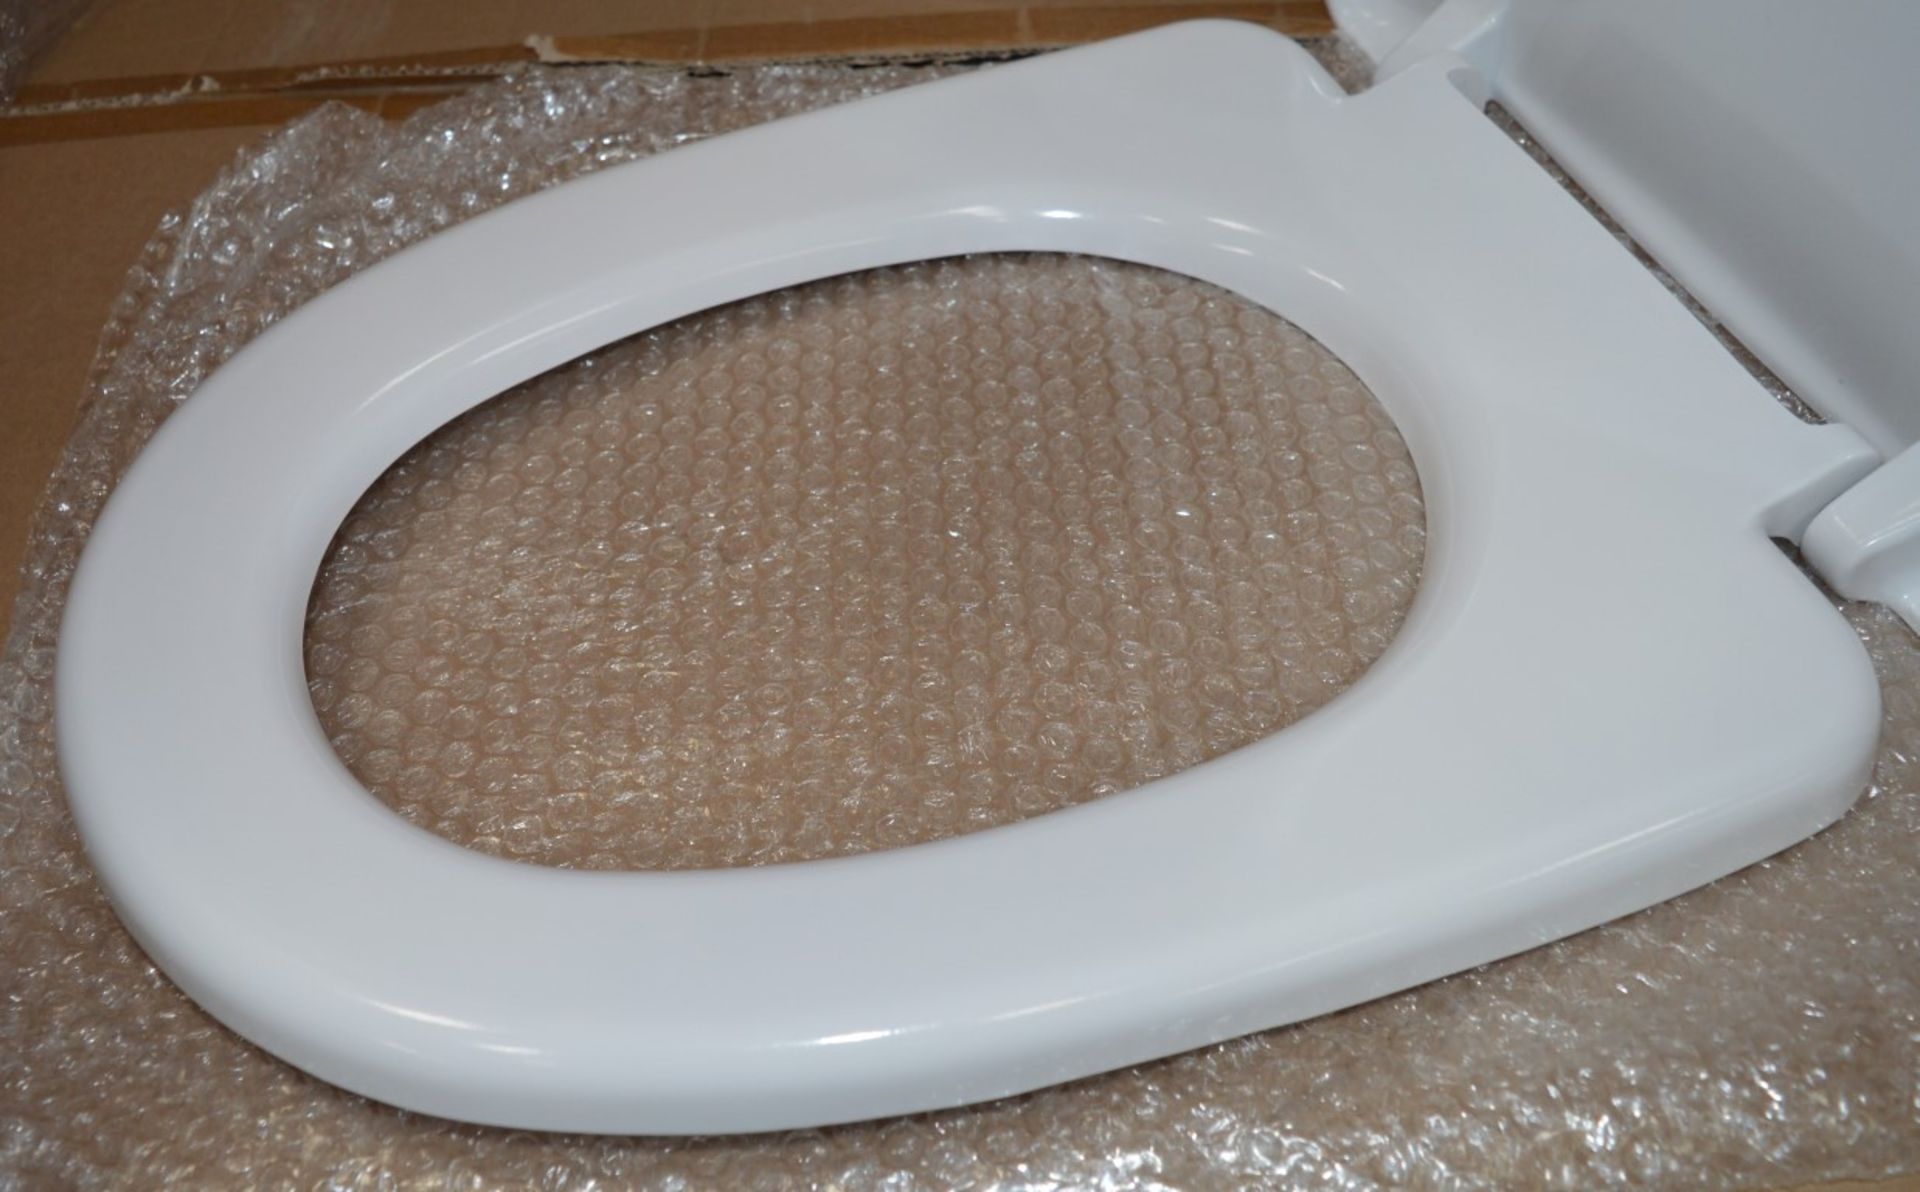 1 x Vogue Caprice Modern White Soft Close Toilet Seat and Cover Top Fixing - Brand New Boxed Stock - - Image 2 of 3